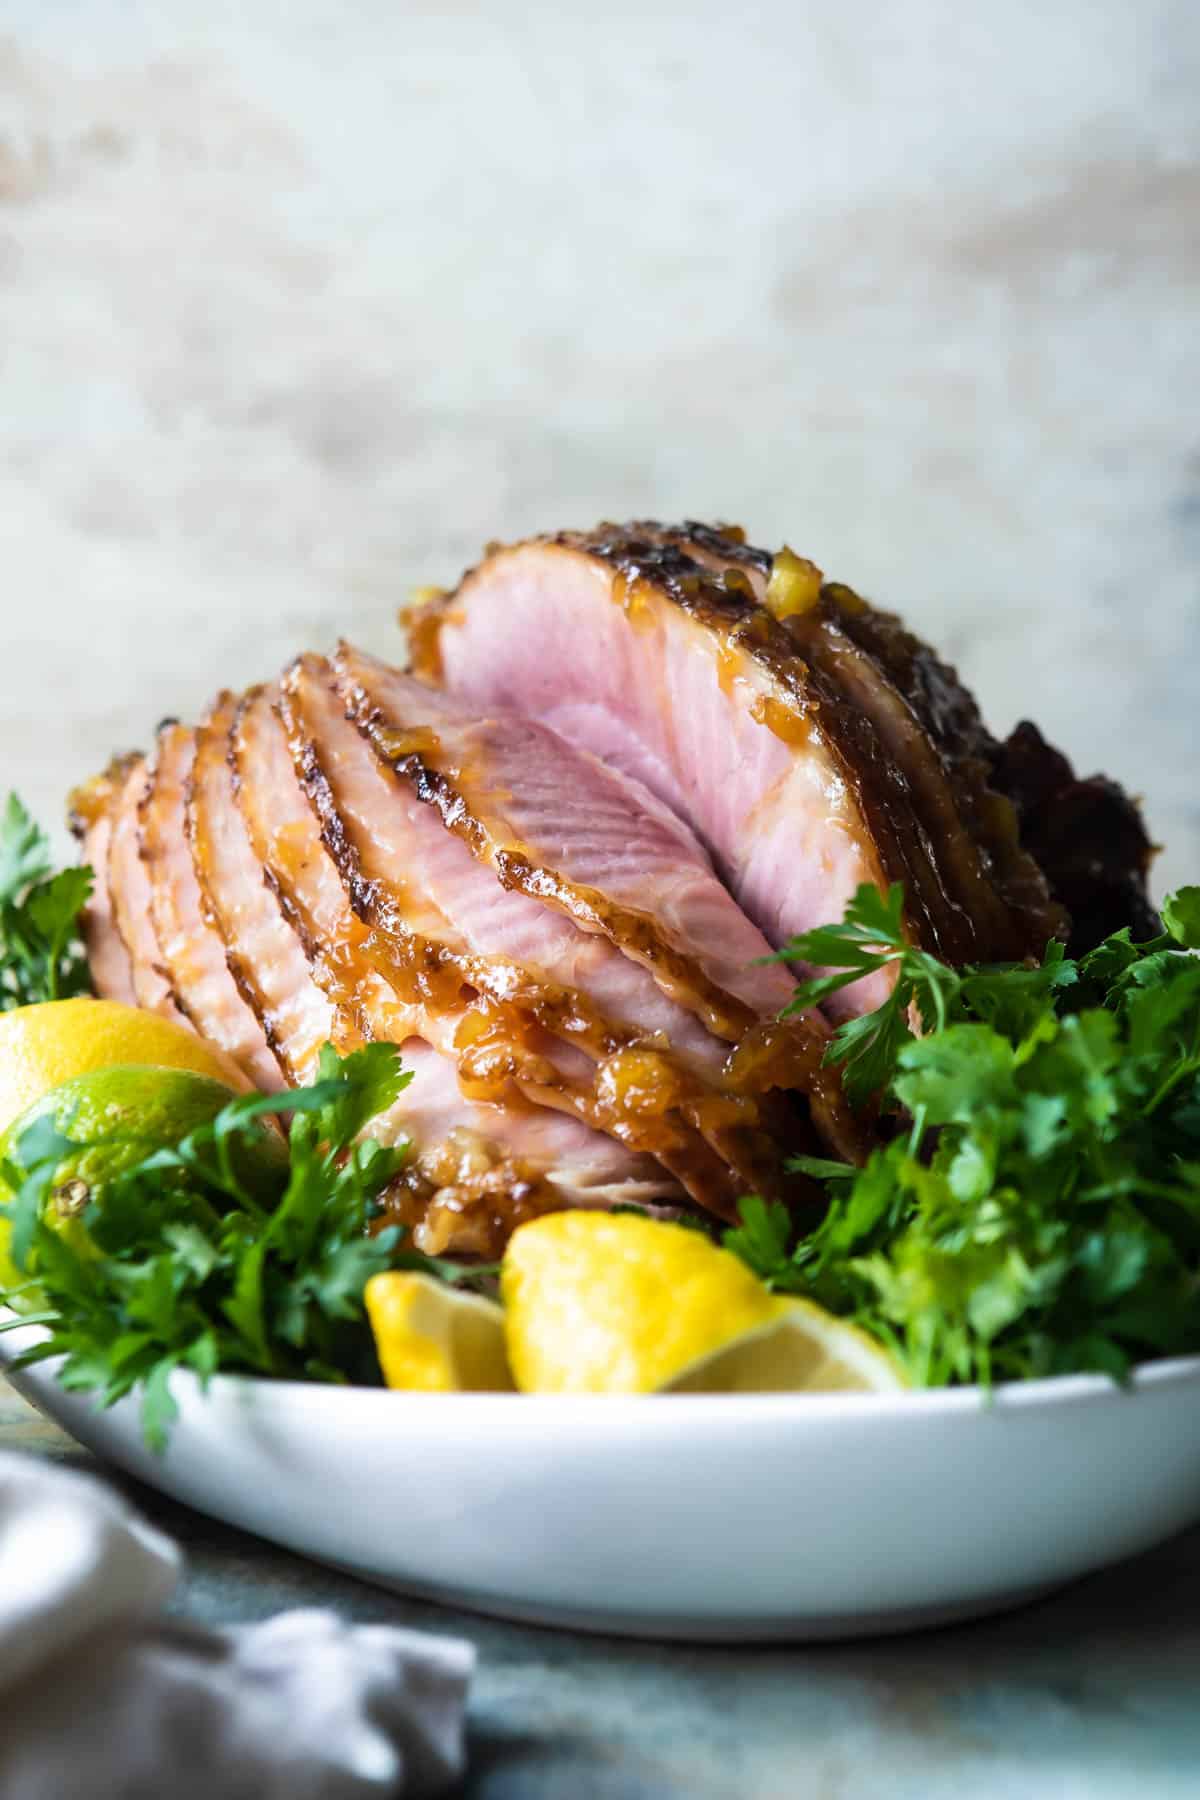 A glazed ham on a platter with fruit and herbs.